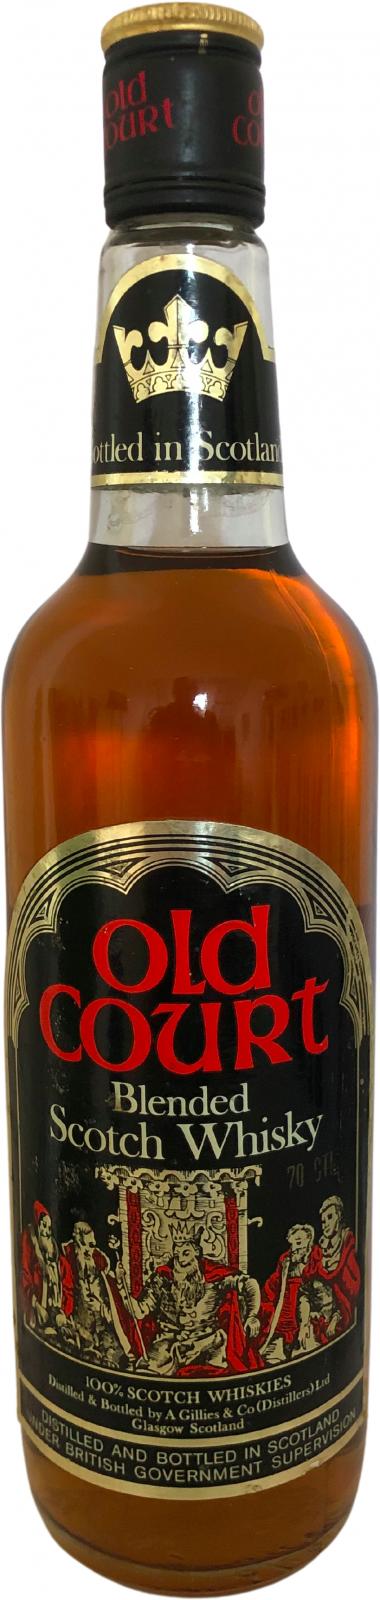 Old Court Blended Scotch Whisky 40% 700ml